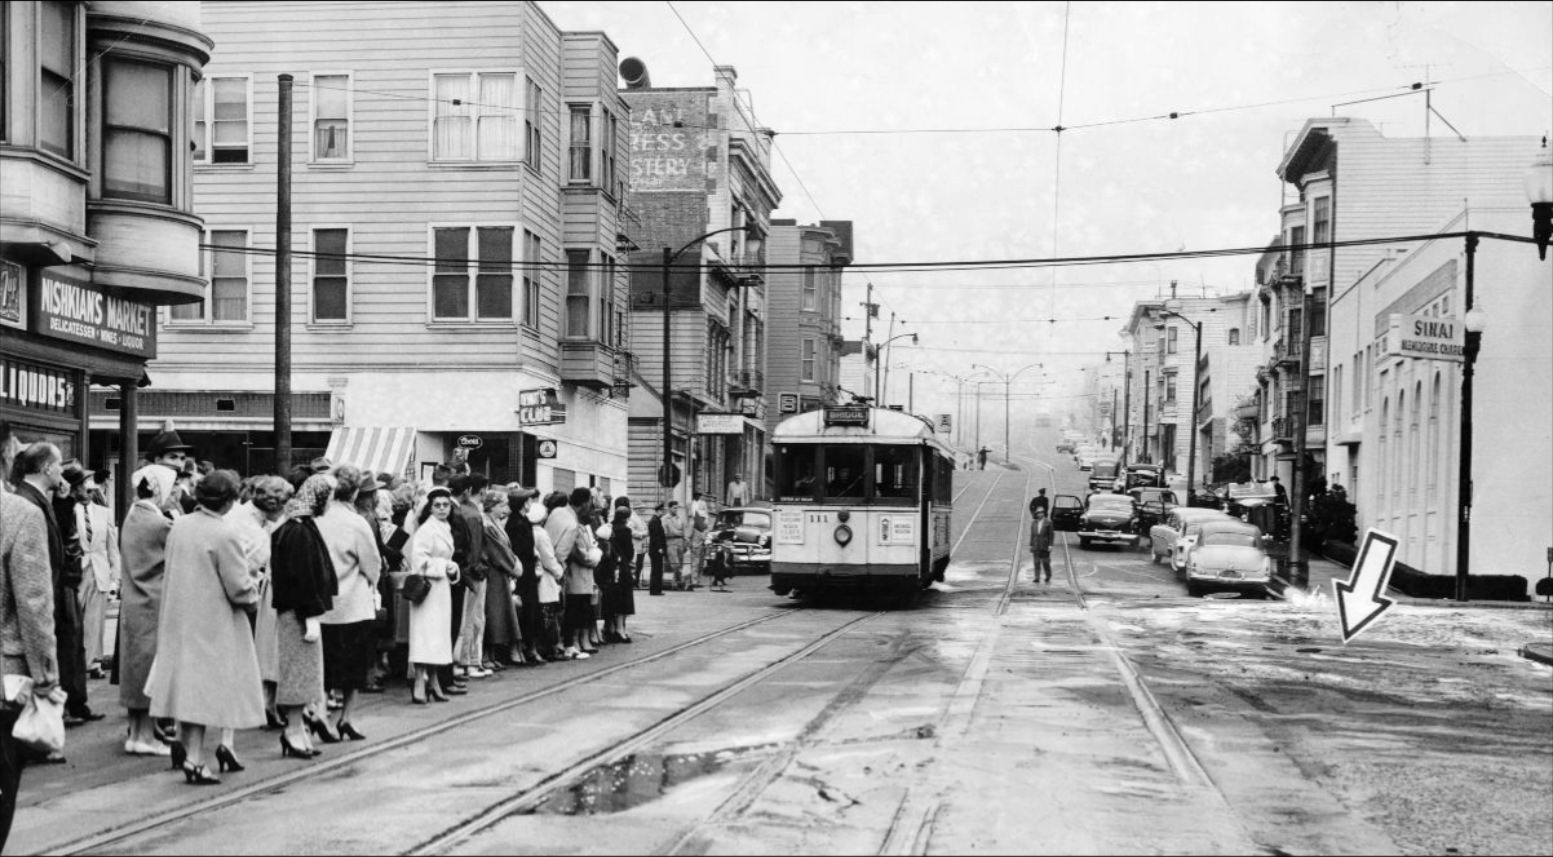 Site of a water main break at Geary and Divisadero, 1956.